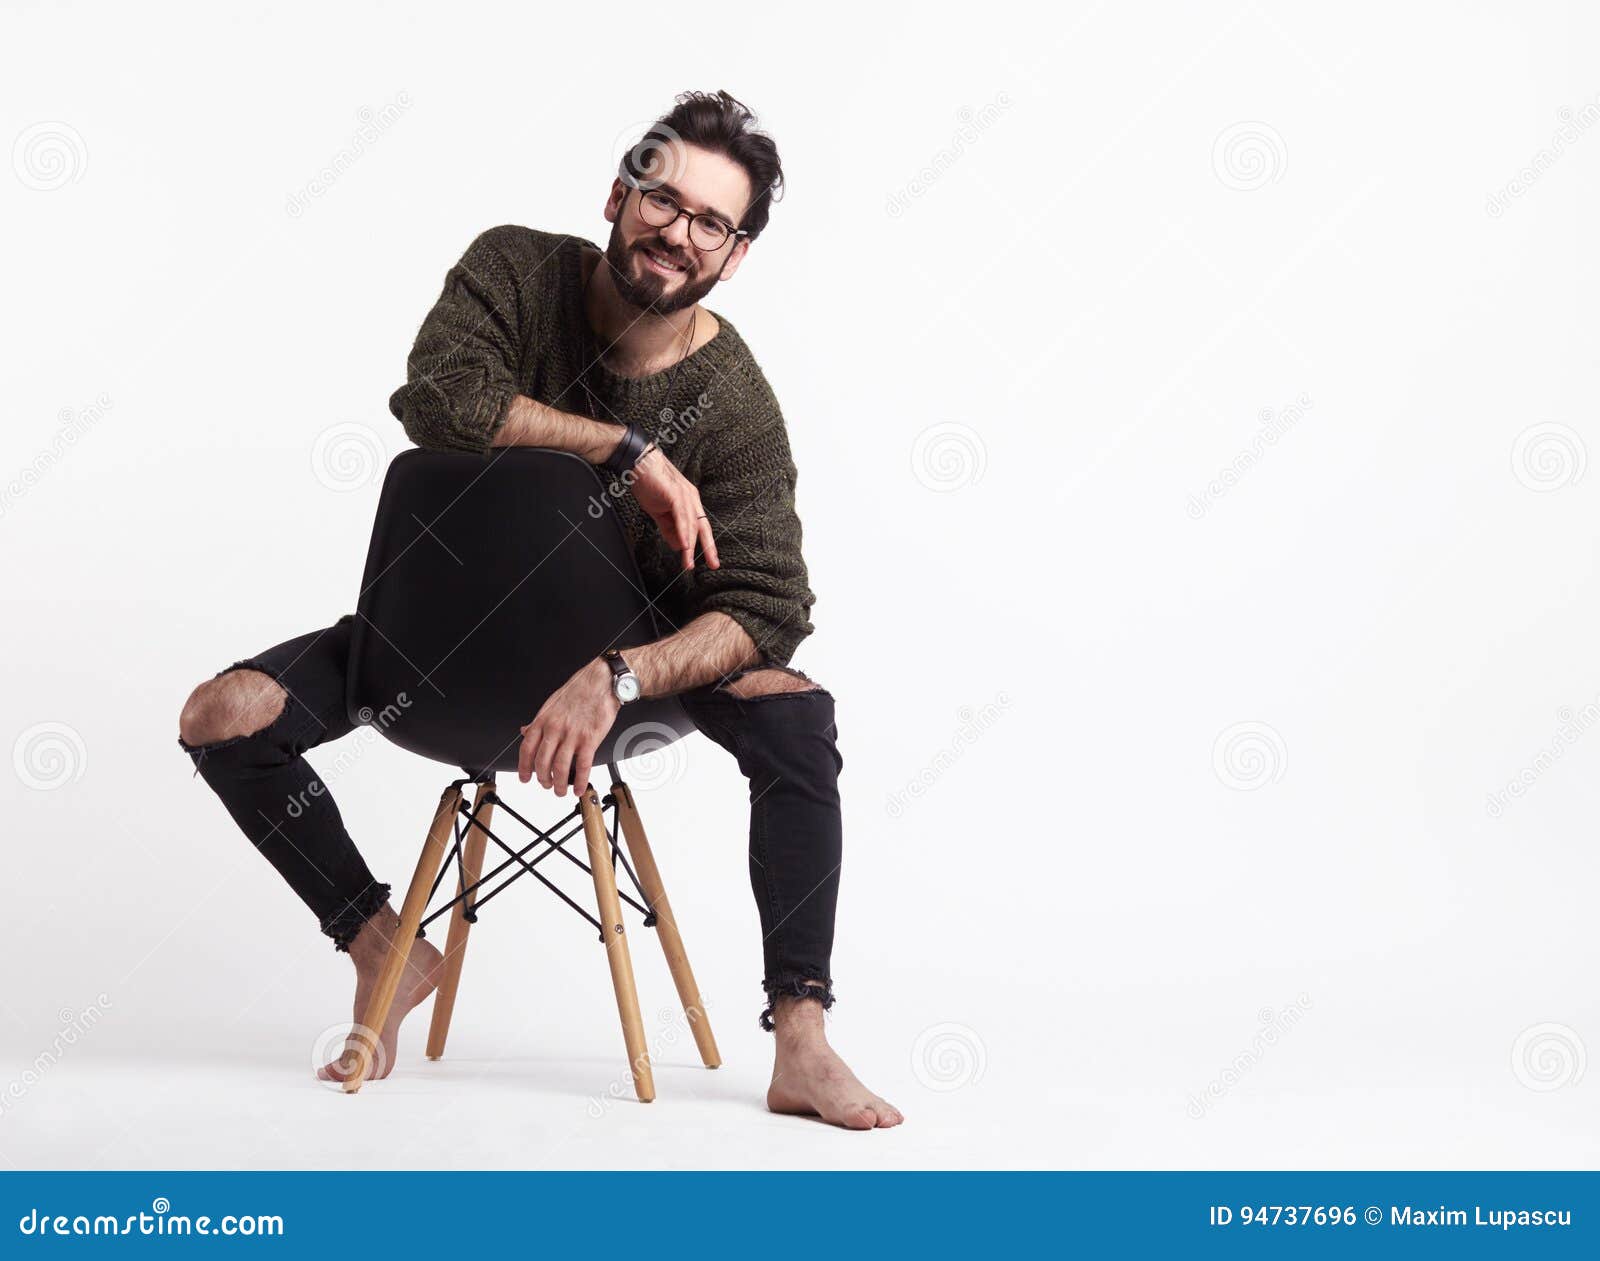 19 Male Poses and Tips for Outstanding Your Next Photoshoot